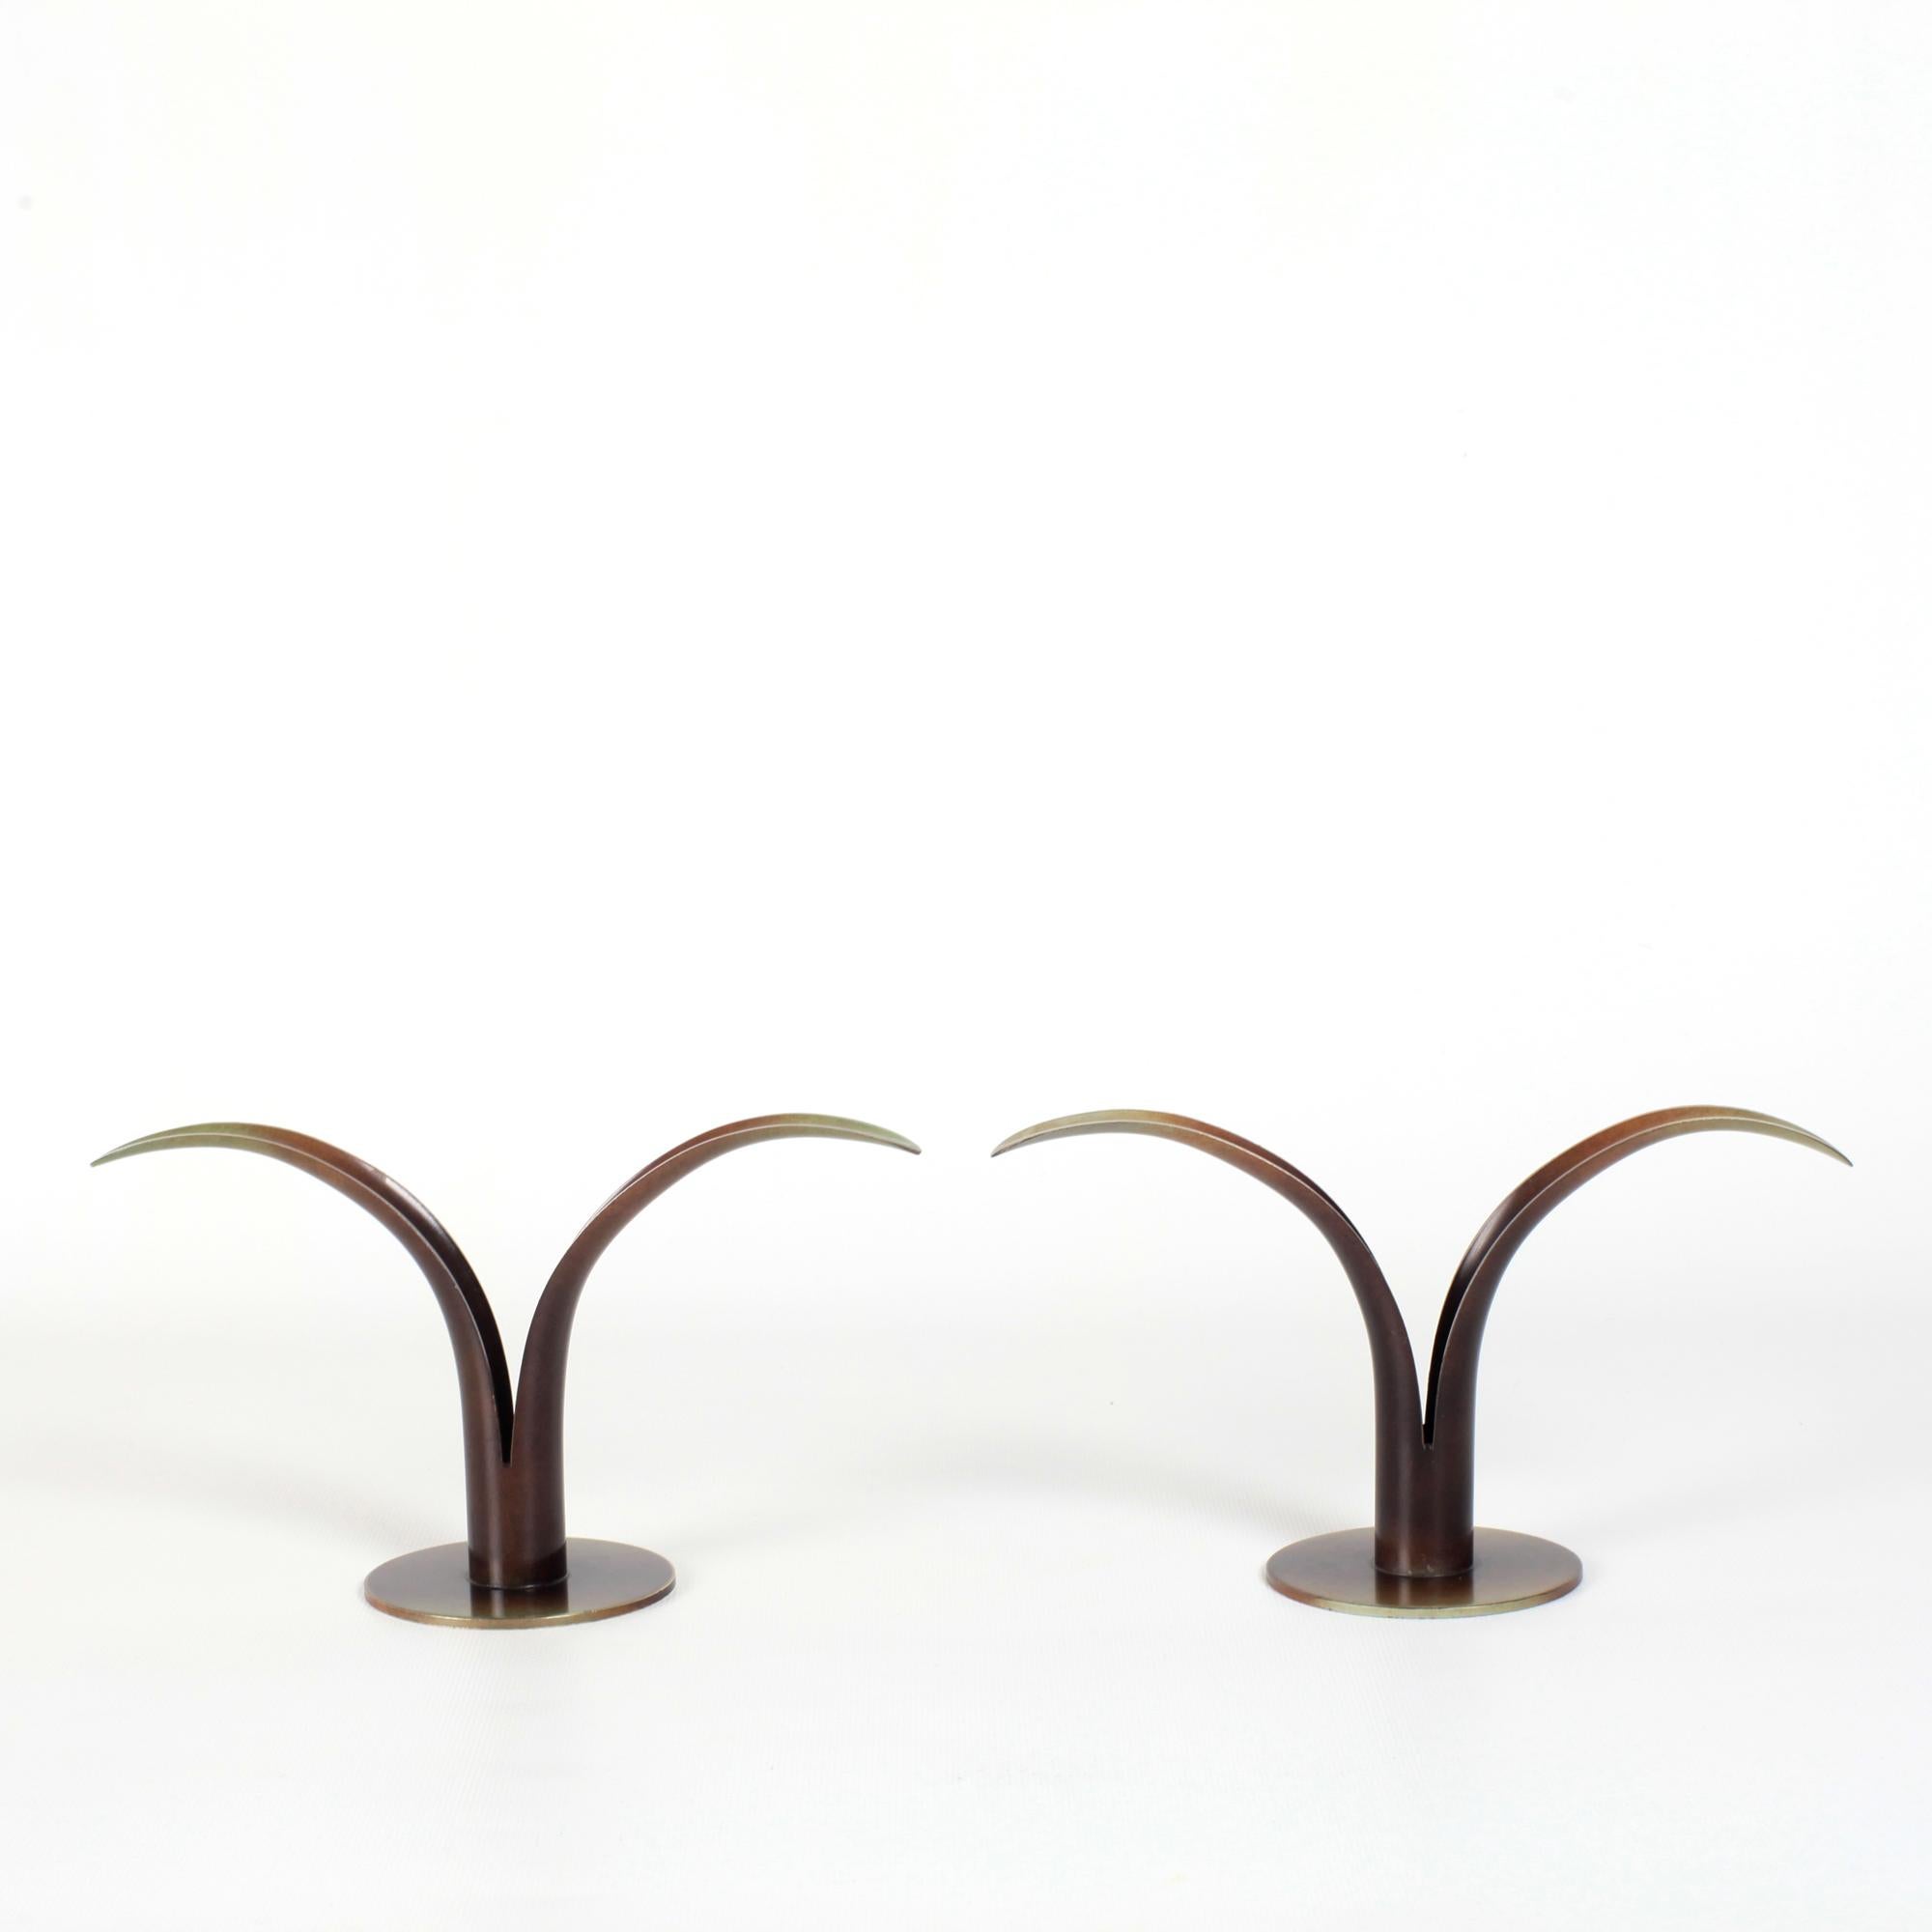 Swedish Ivar Ålenius Björk for Ystad Brons, Pair of Candle Holders in Patinated Brass